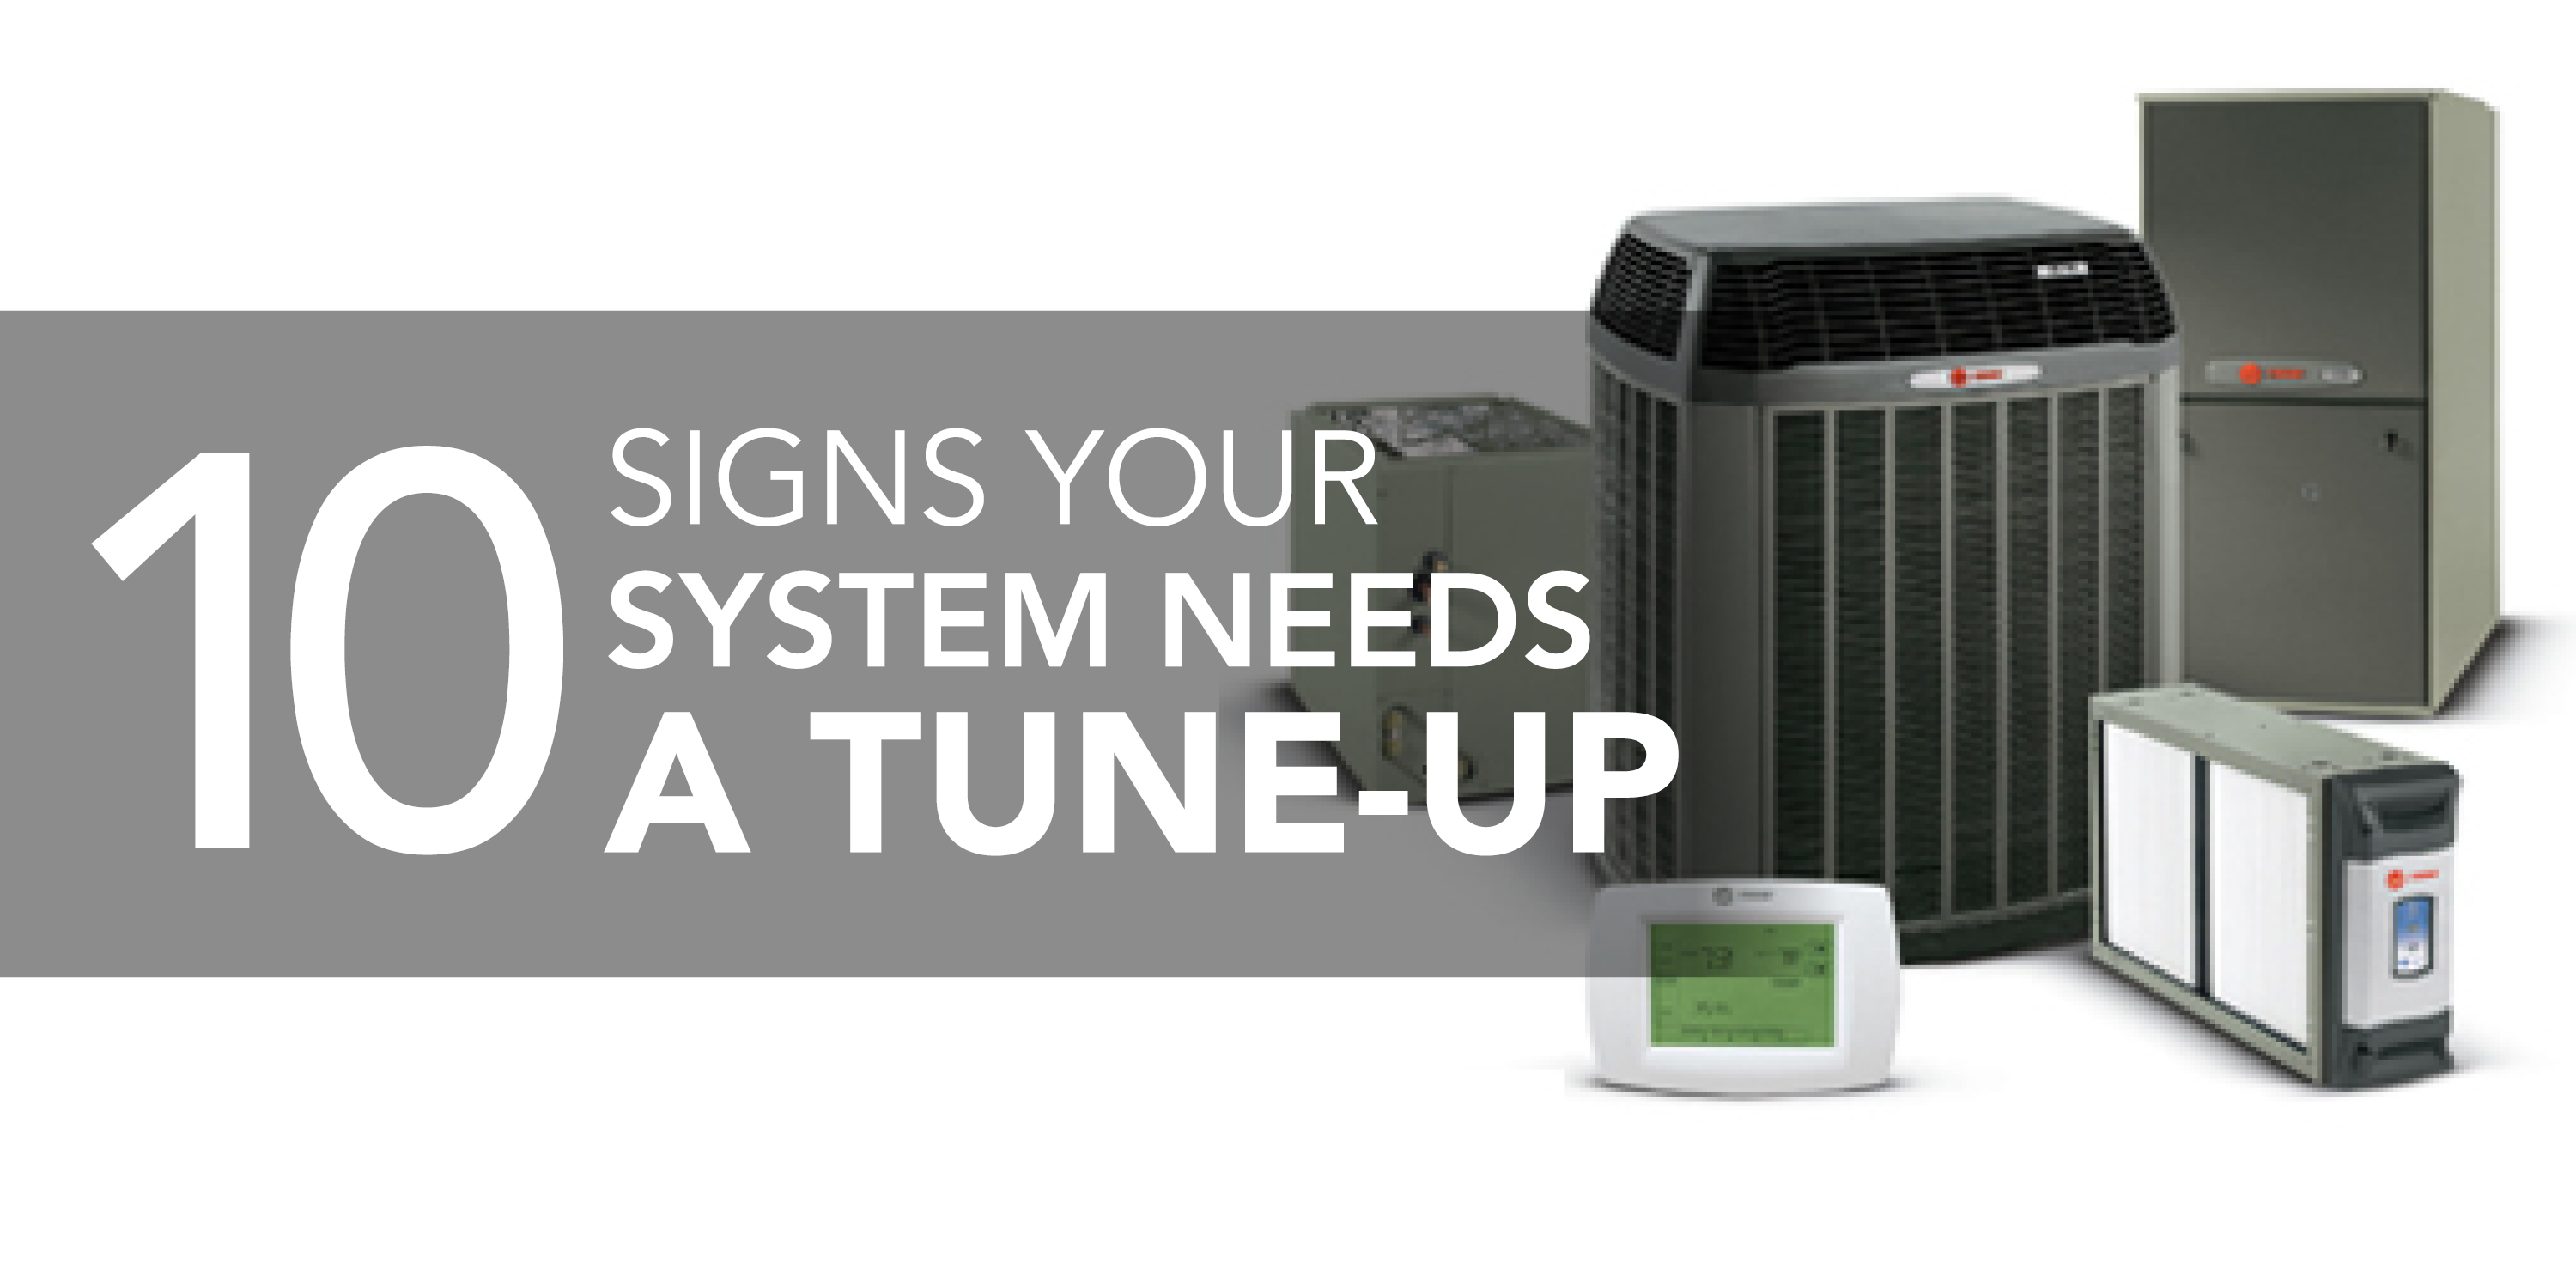 AC equipment with text: "10 signs your system needs a tune-up"